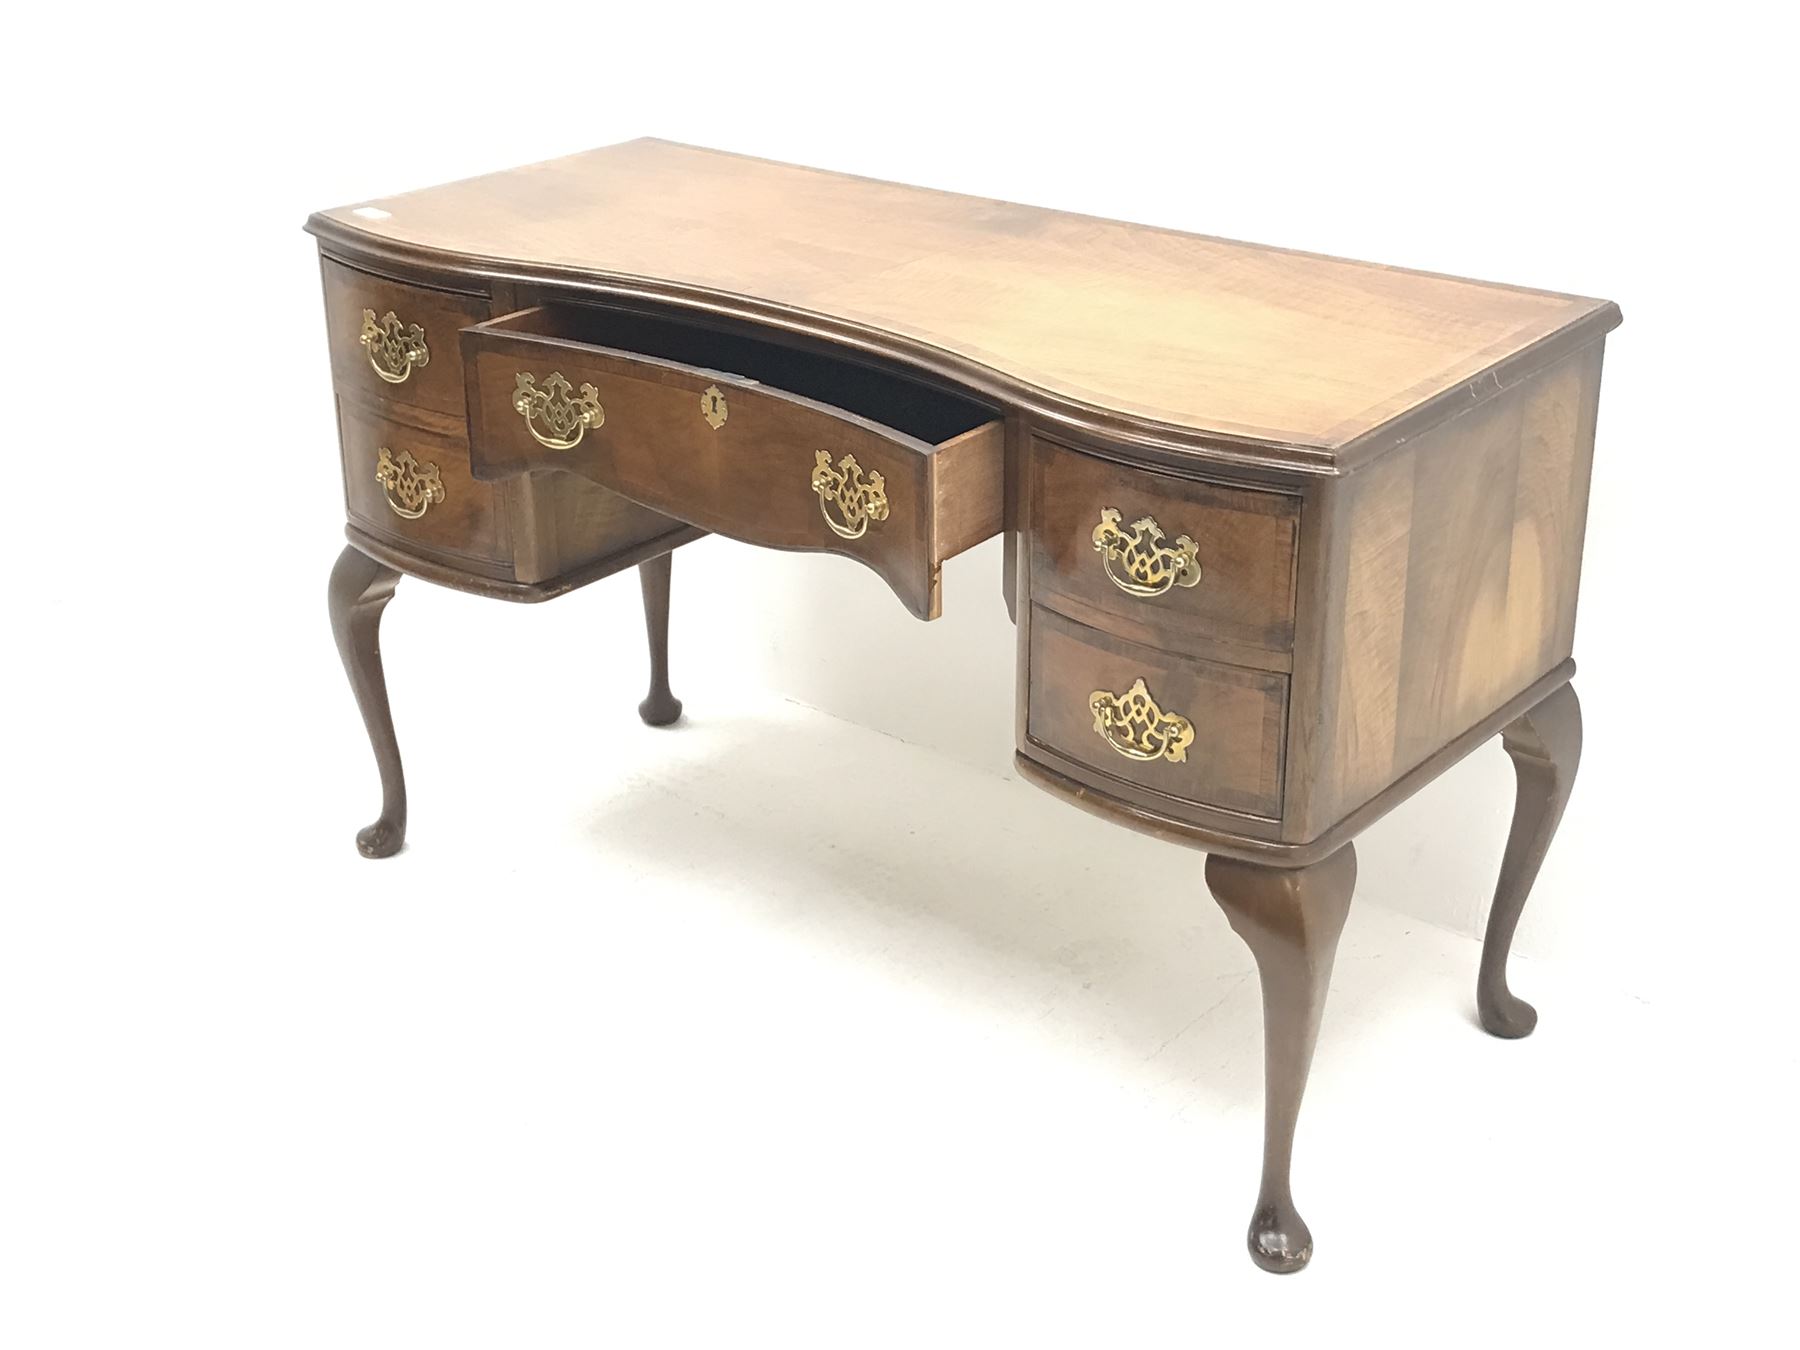 Early 20th century mahogany and rosewood kidney shaped desk - Image 3 of 3